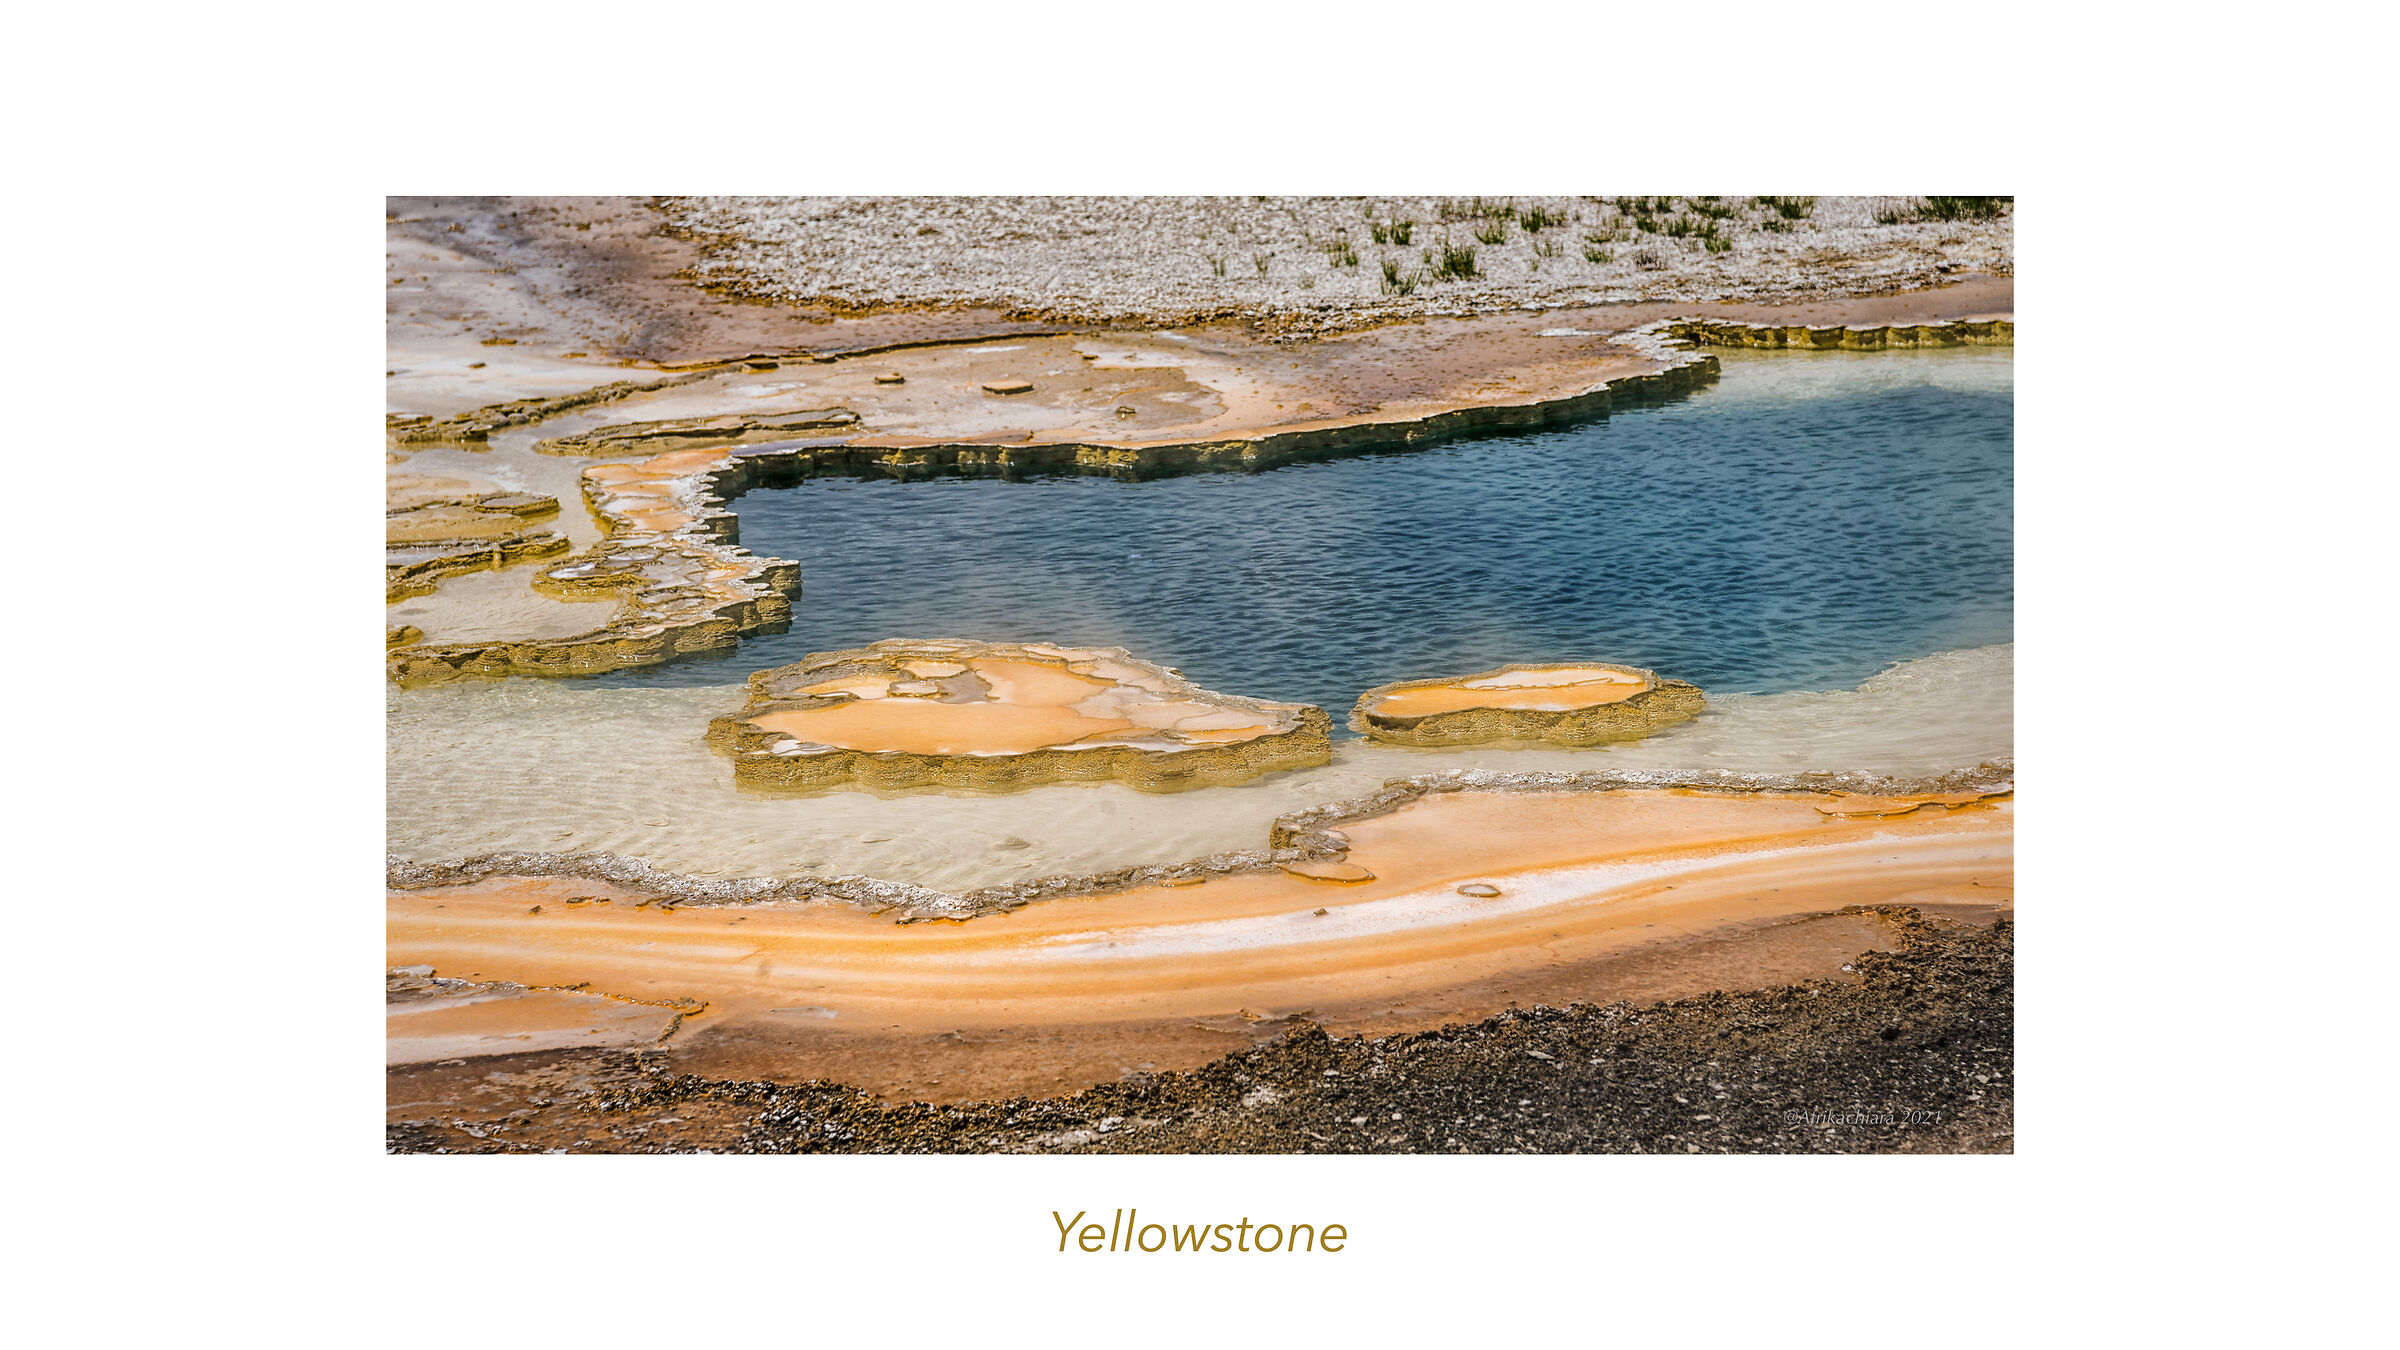 The colors of Yellowstone...